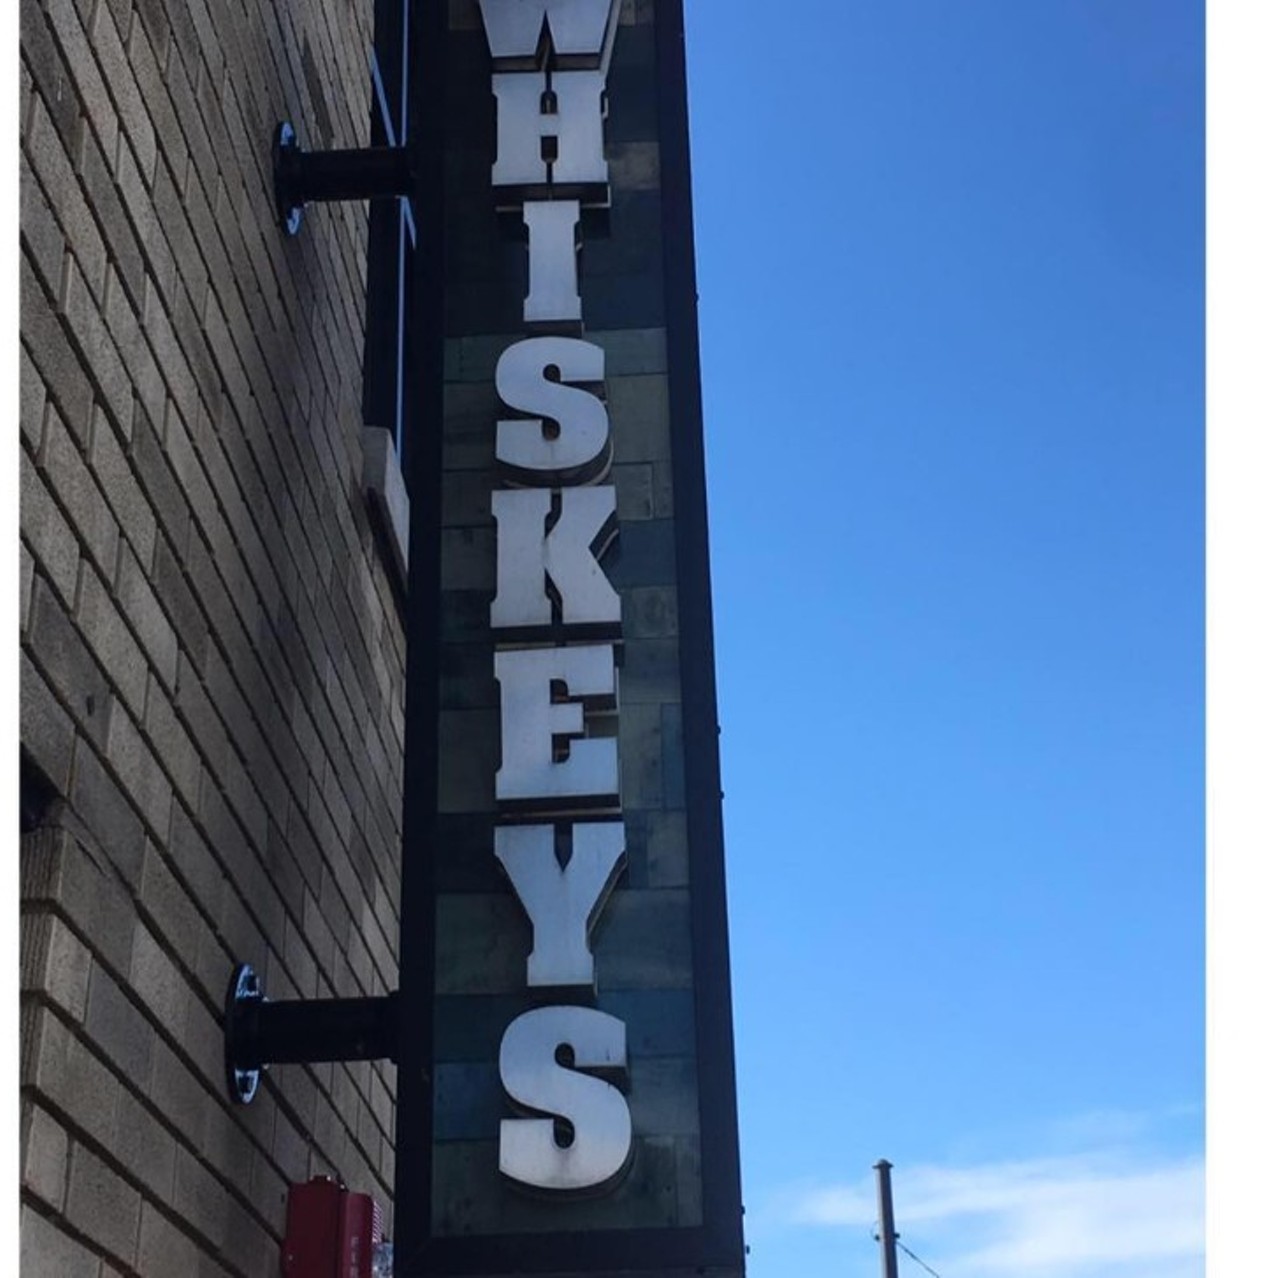 Whiskeys on the Water
2903 Biddle Ave., Wyandotte  
Catch some rays on Whiskey&#146;s outdoor patio as you quench your thirst with a &#147;Lynchburg Lemonade&#148; or &#147;Moonshine Mary.&#148; 
Photo by Whiskeys on the Water Facebook